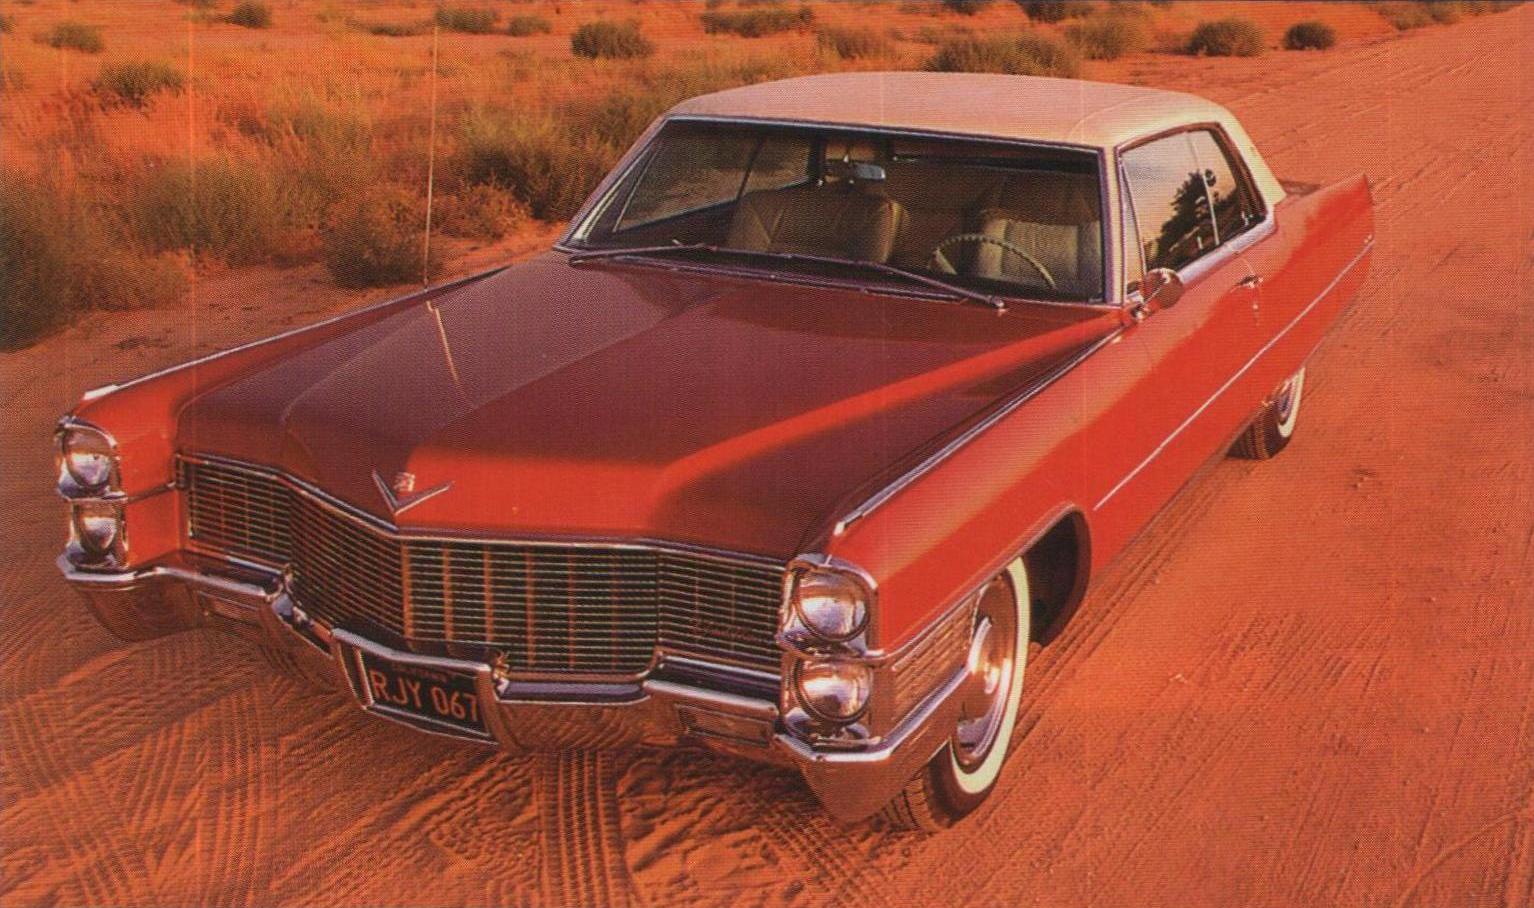 1965 Cadillac Coupe DeVille.jpg